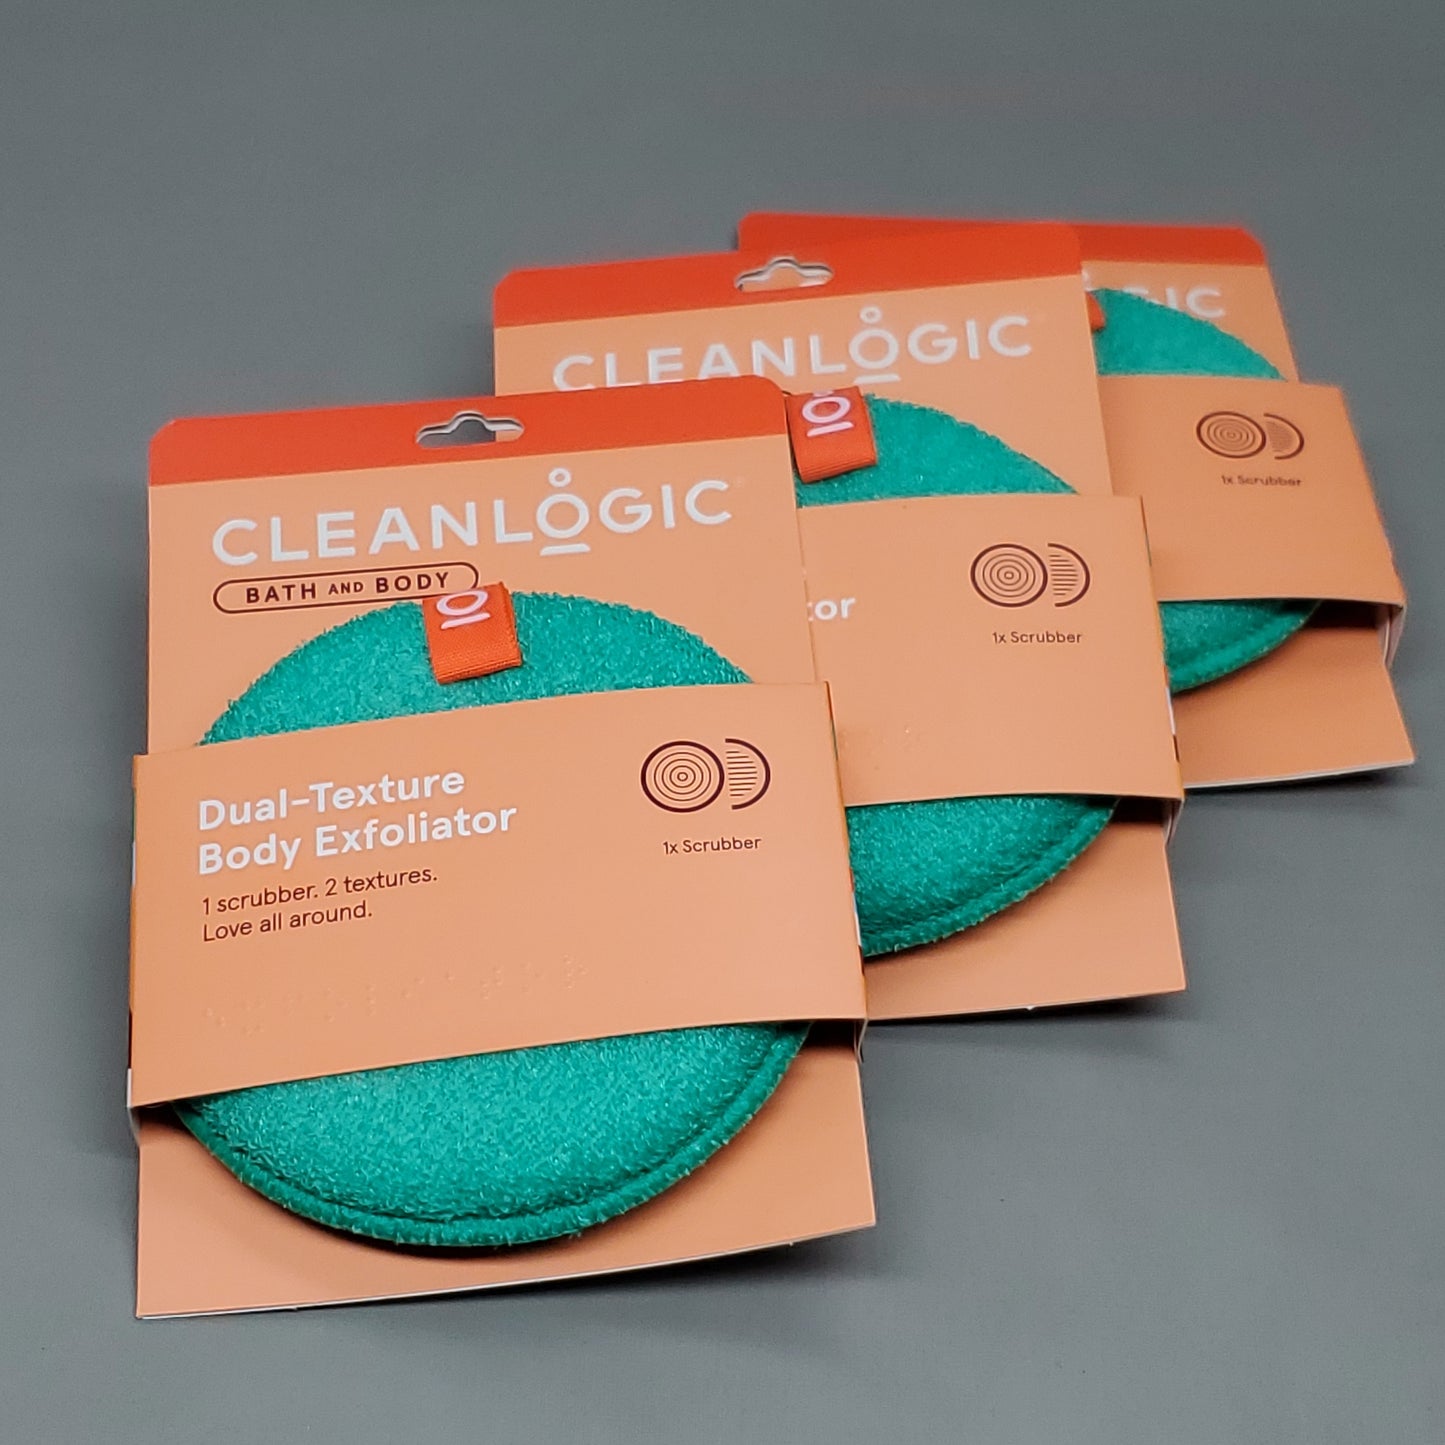 CLEANLOGIC 3 Pack of Dual-Texture Body Exfoliator Scrubber 4.92"X.91" Green (New)